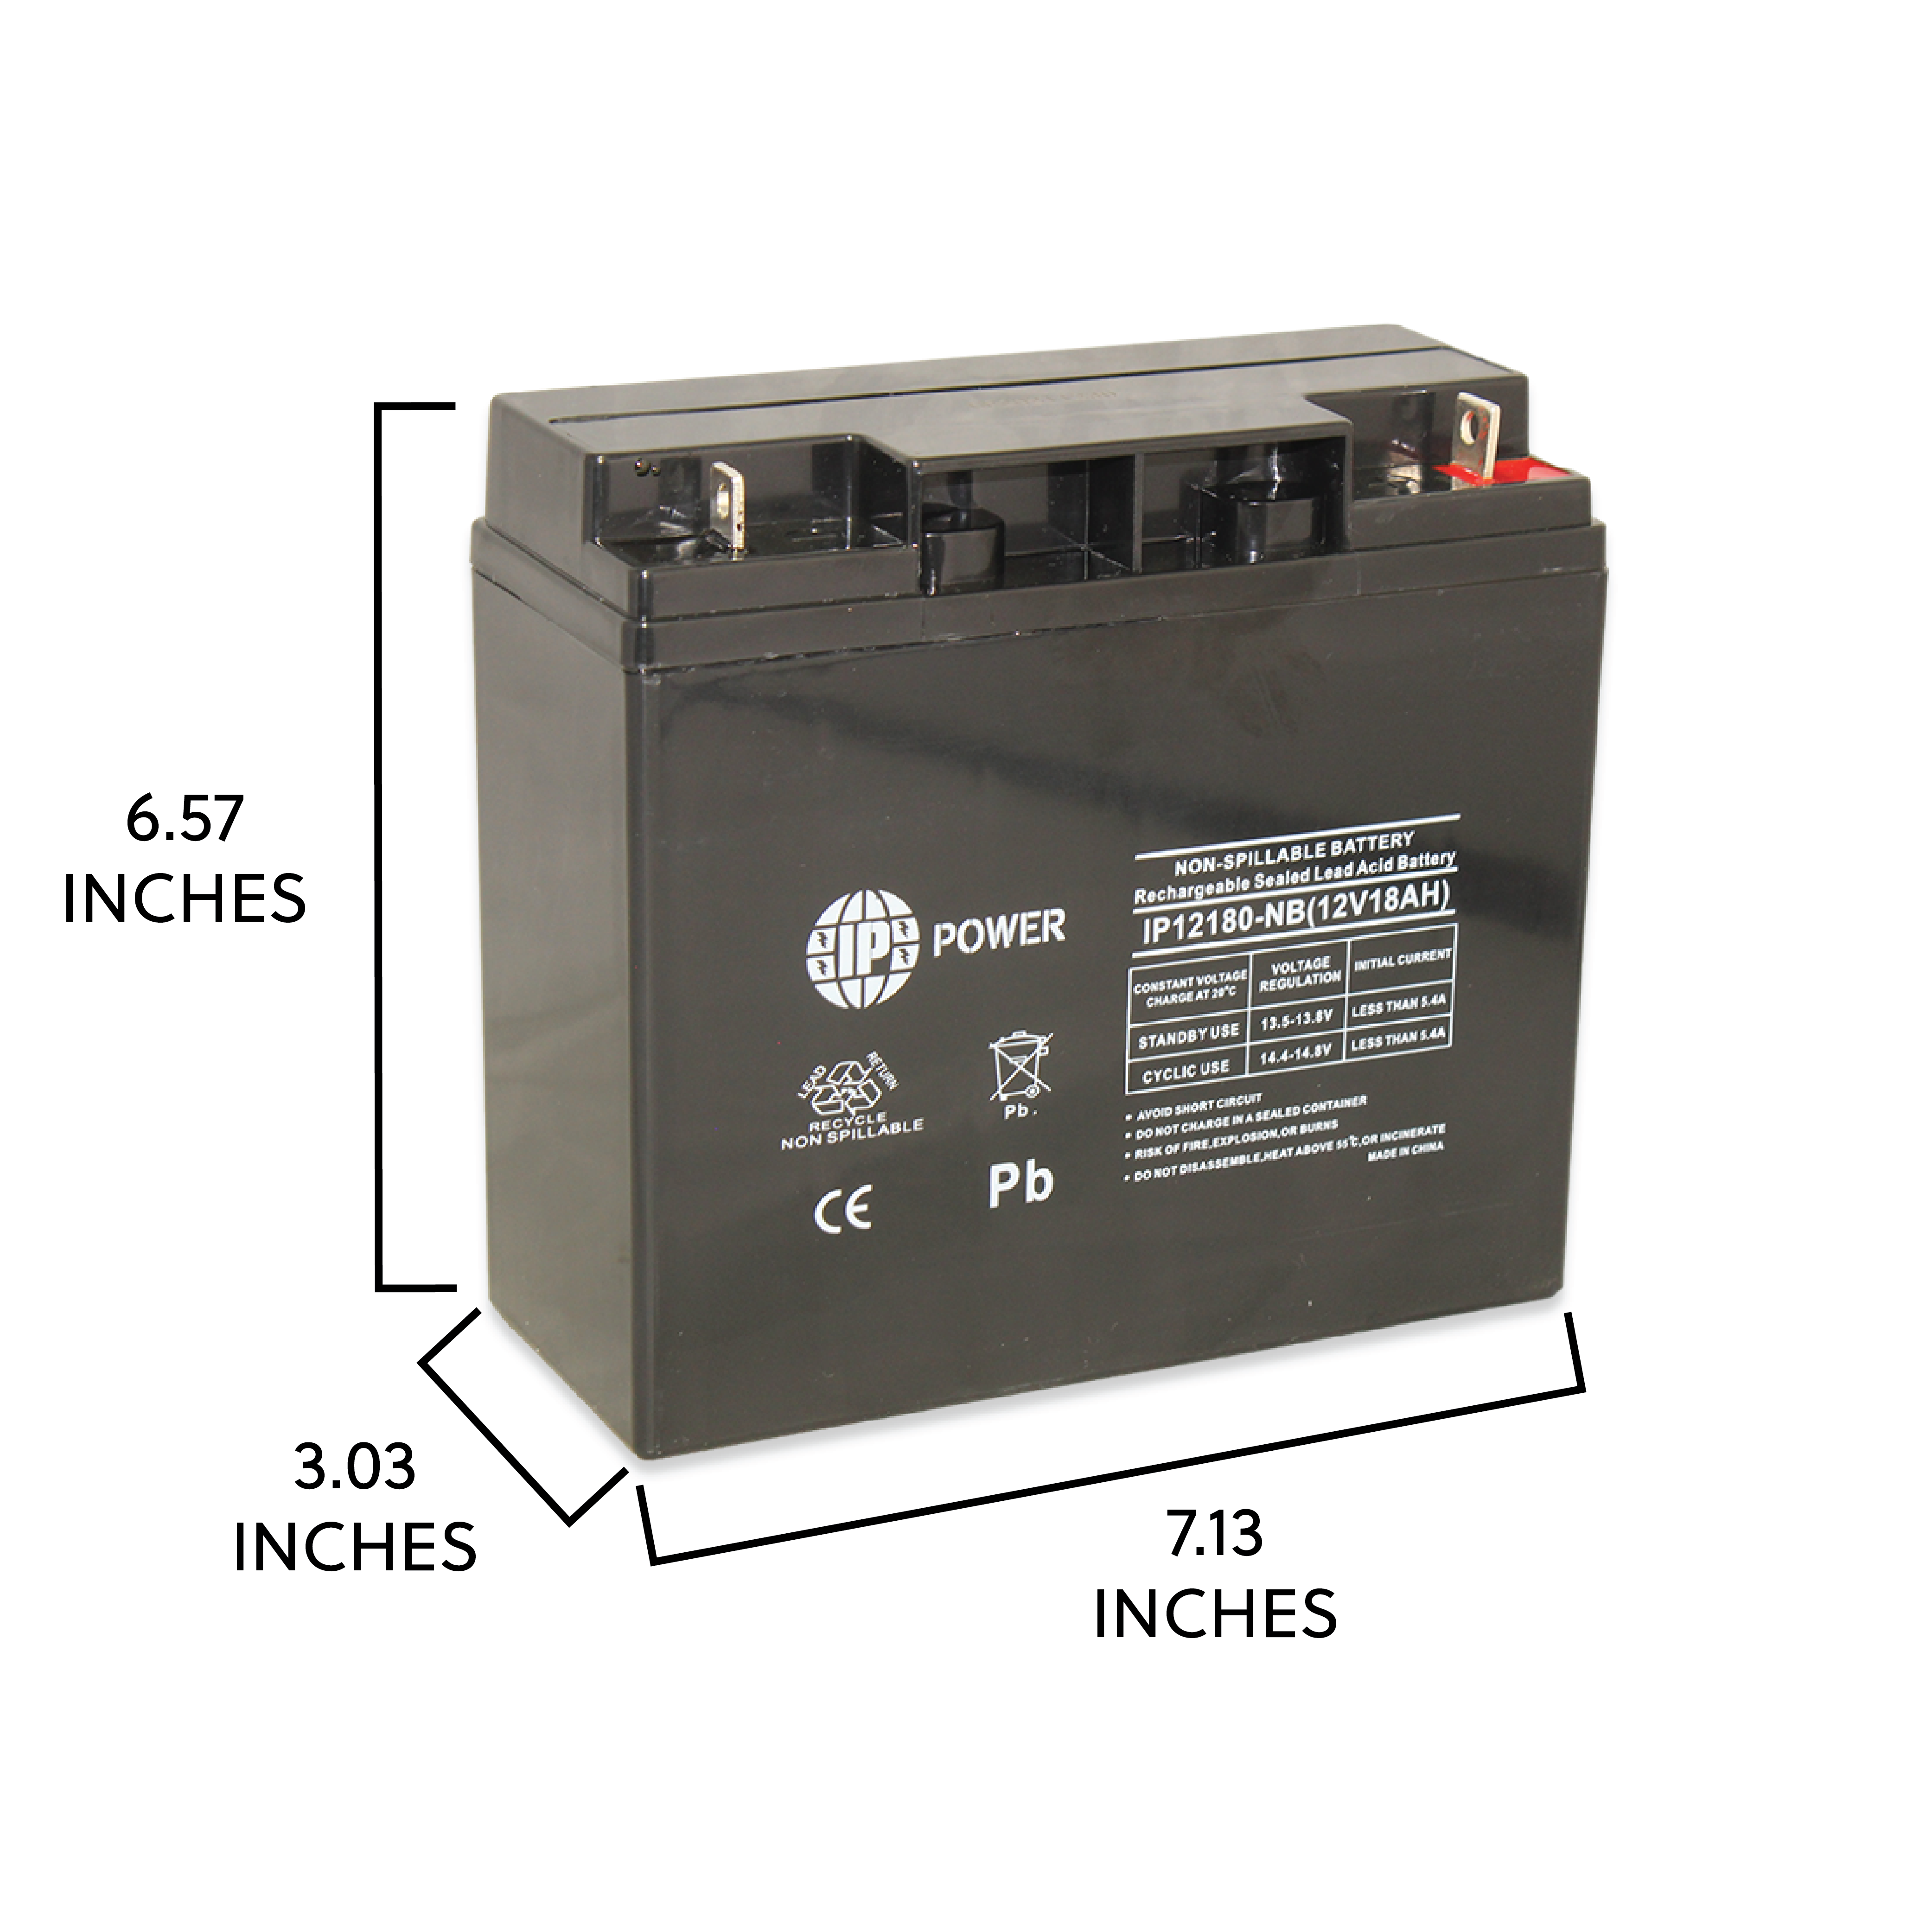 IP POWER 12180-NB, 12 Volt 18 Amp F13 Terminal, Sealed Lead Acid Rechargeable Battery